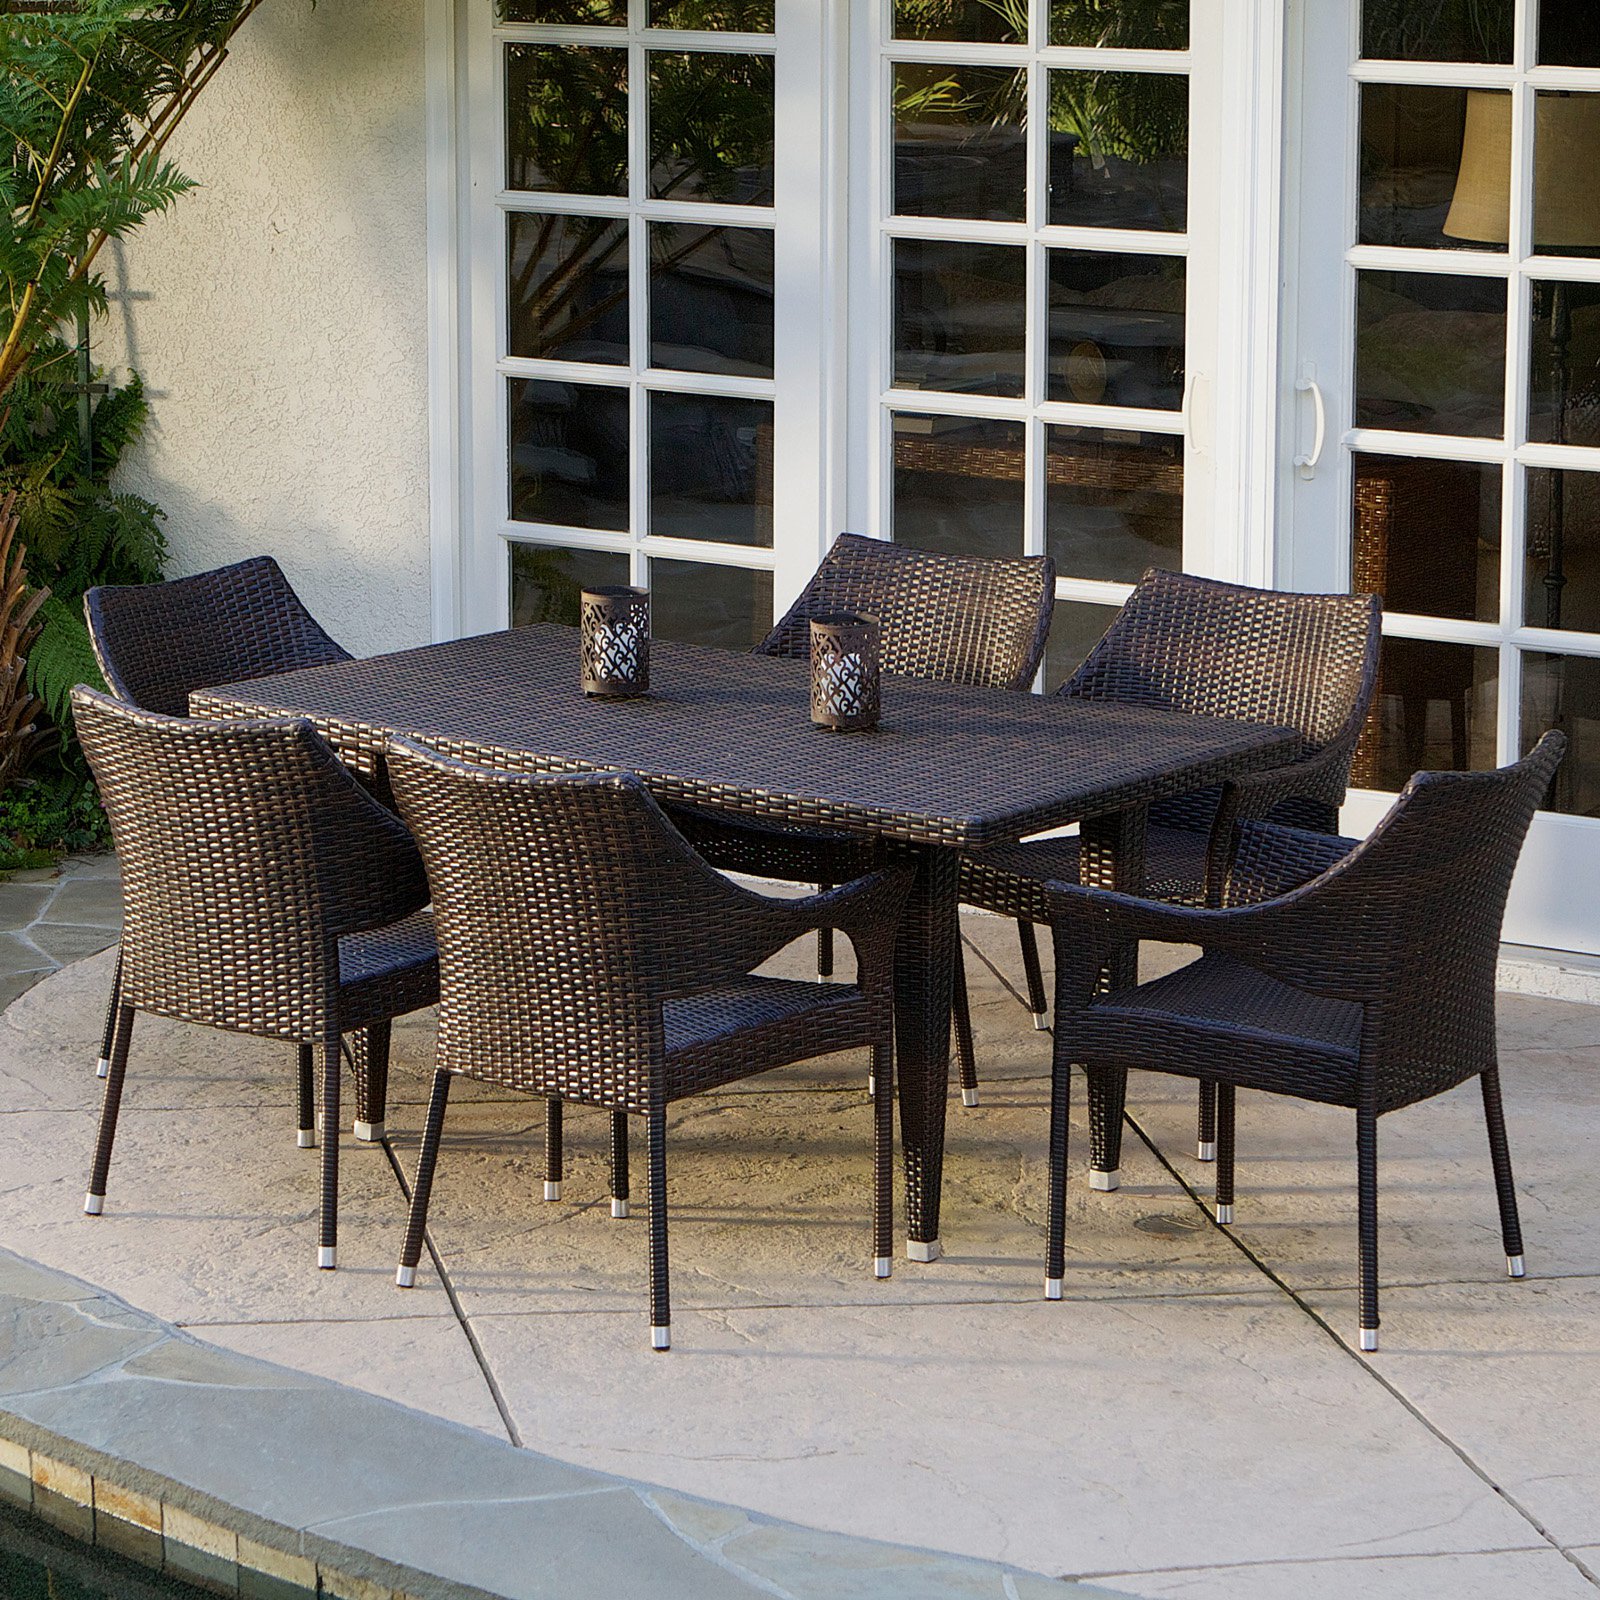 Cliff All-Weather Wicker Patio Dining Set - Seats 6 - image 1 of 10